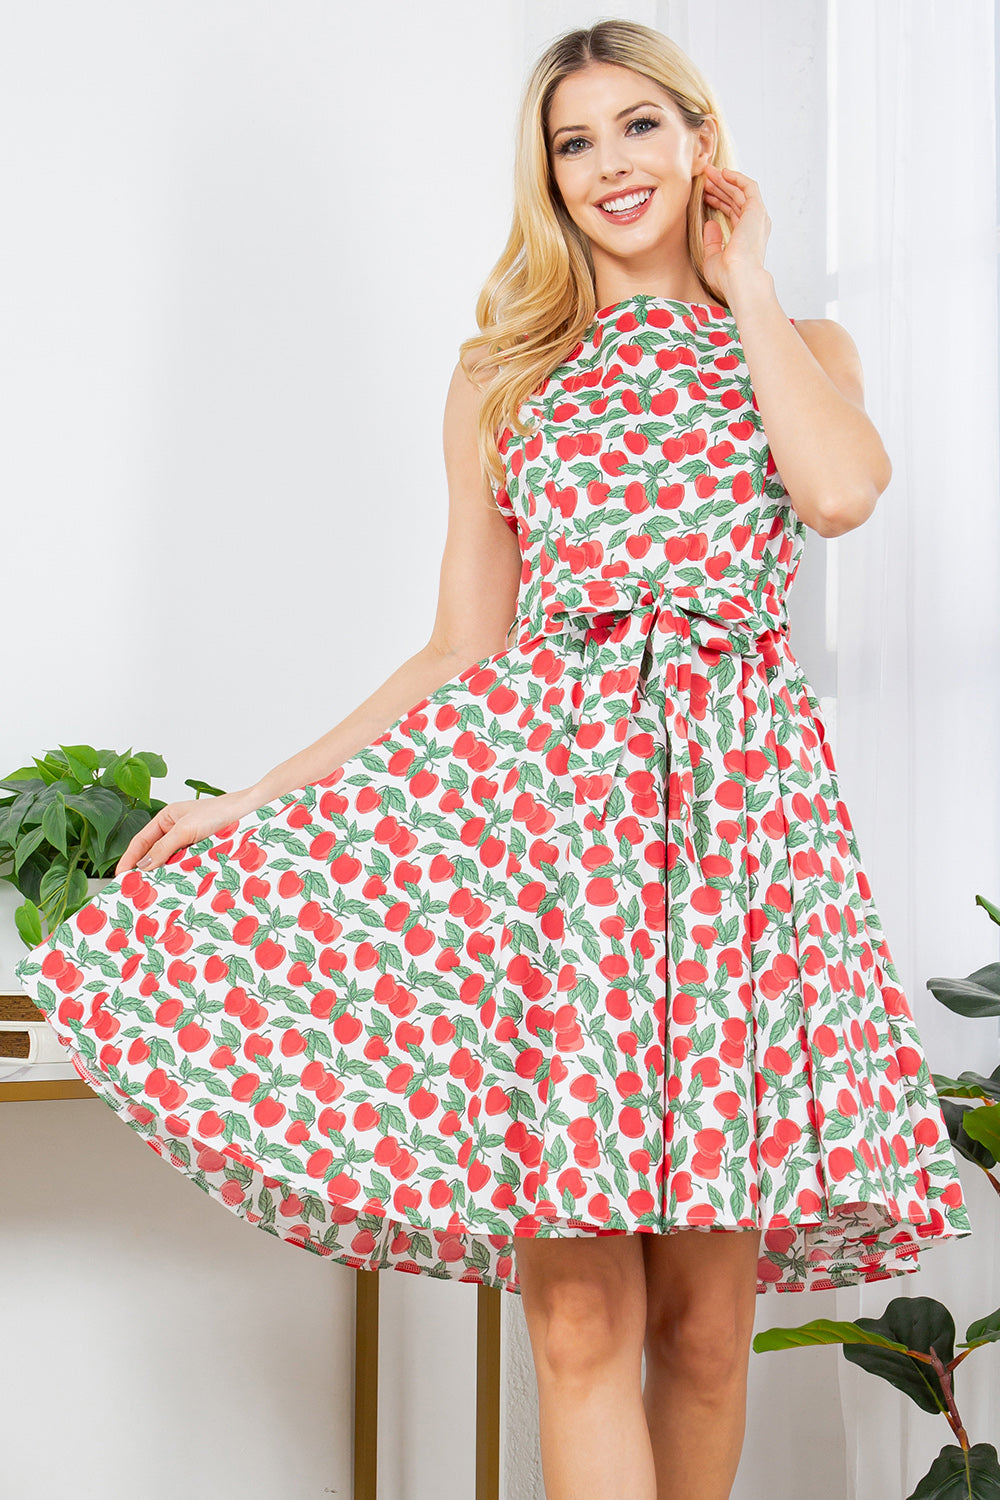 All over Apple Cotton Dress